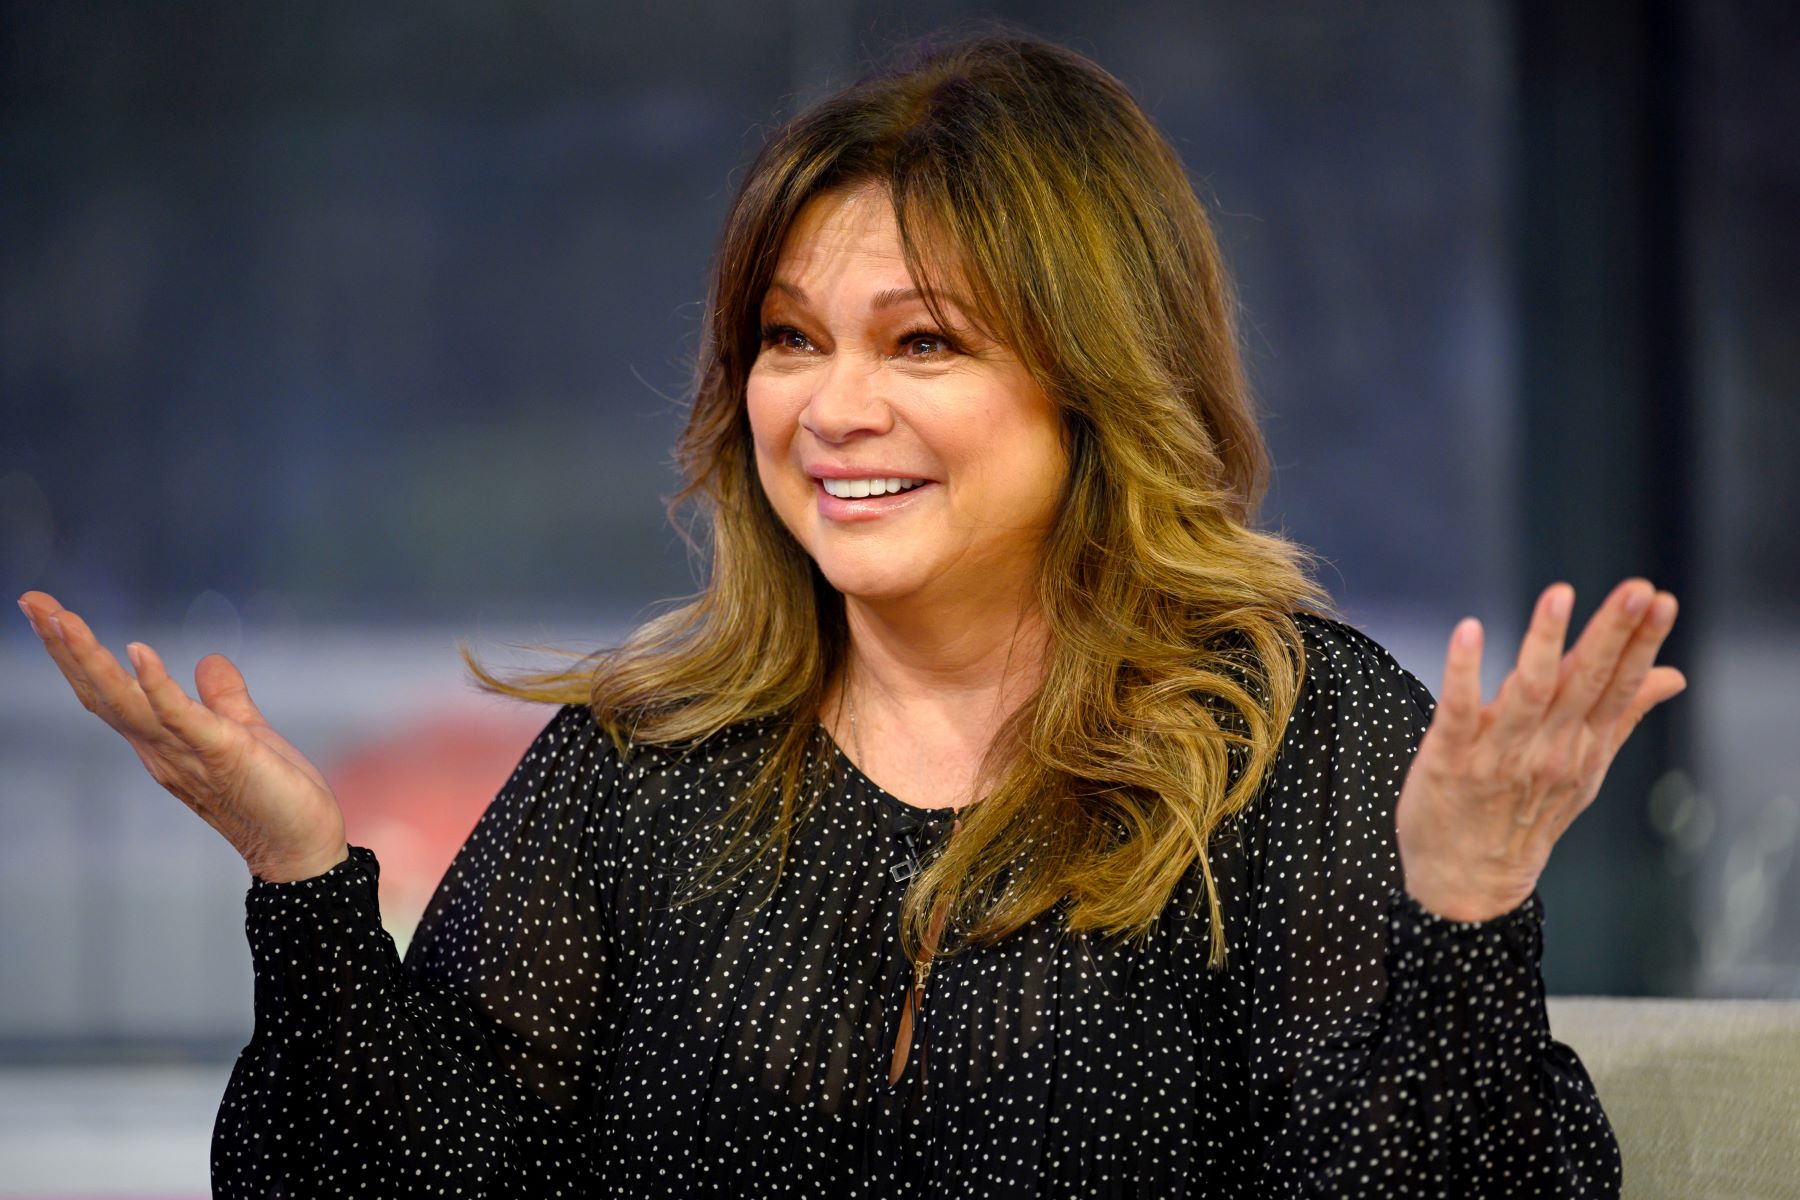 Chef Valerie Bertinelli on 'The Today Show' in June 2022